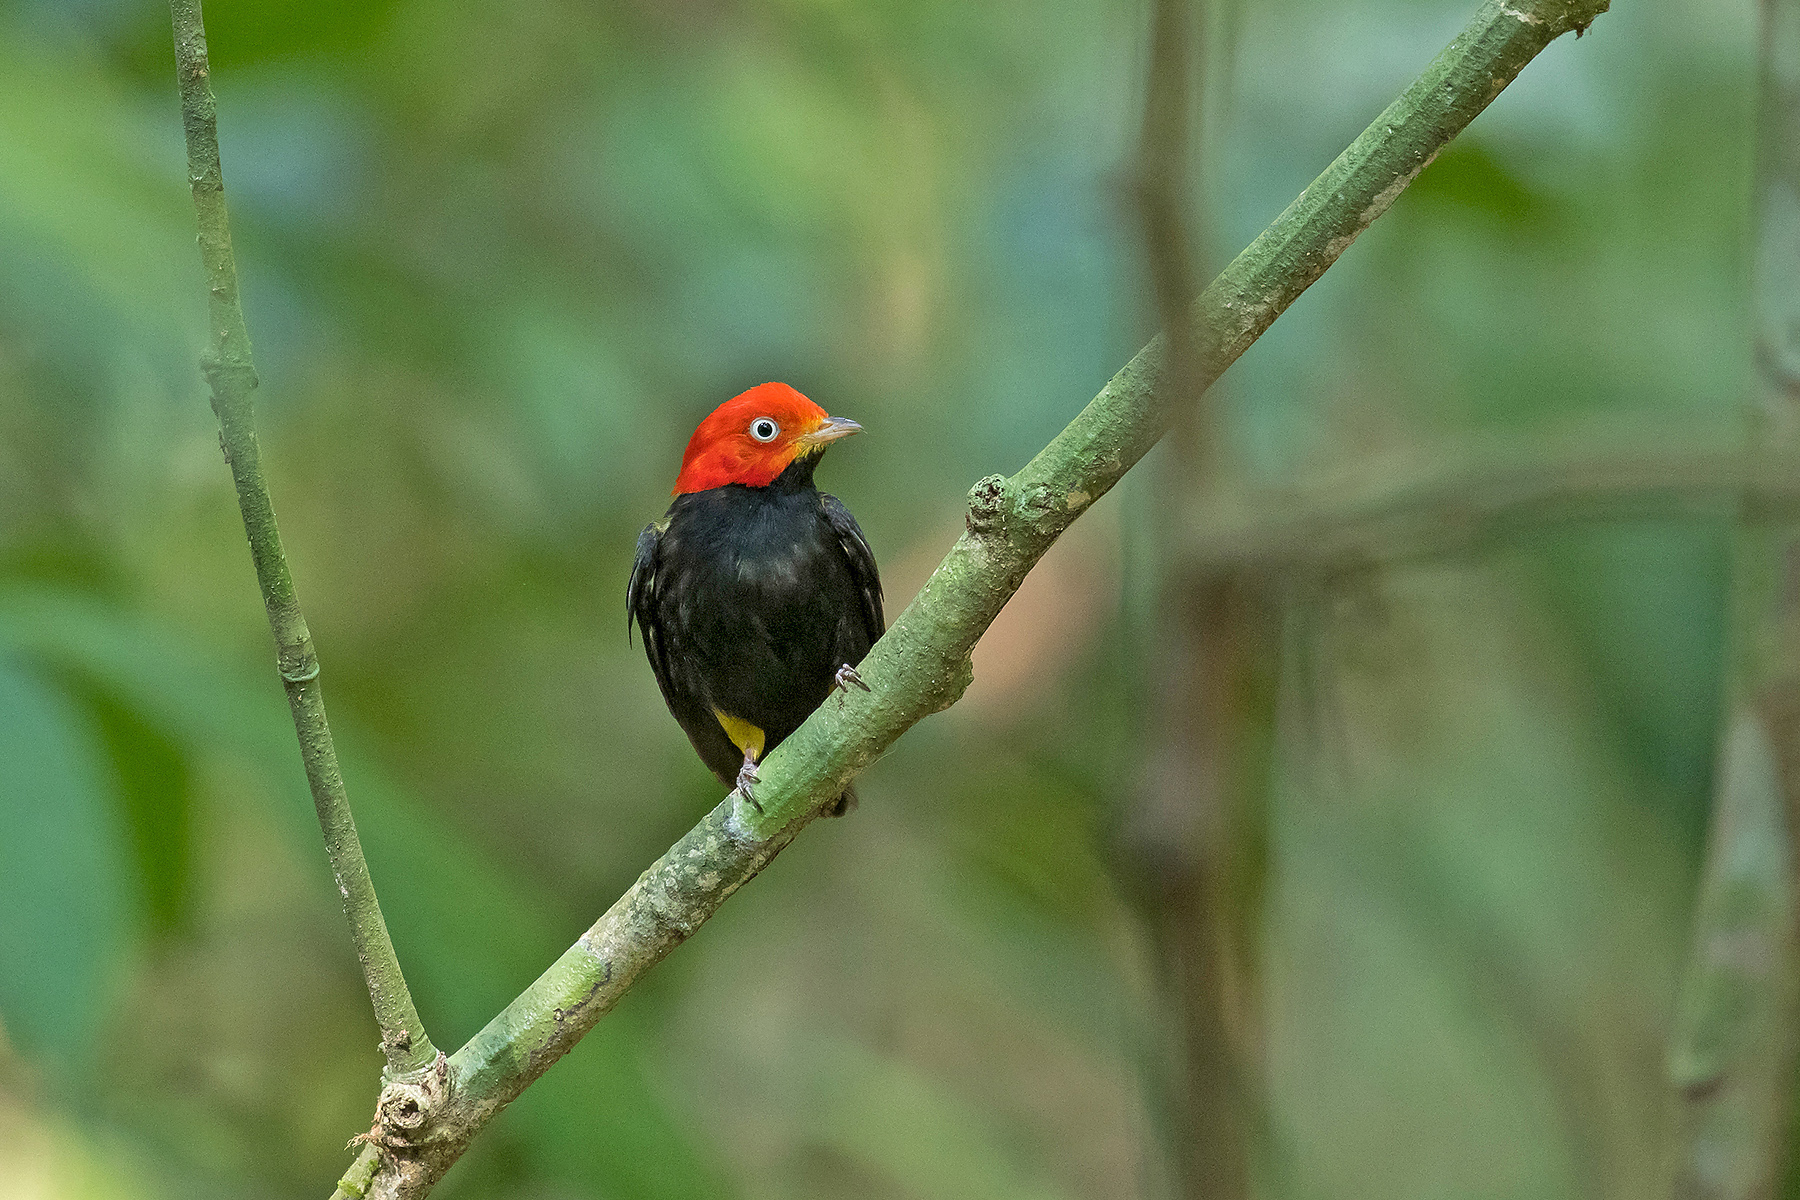 Red-capped Manakin (image by Pete Morris)